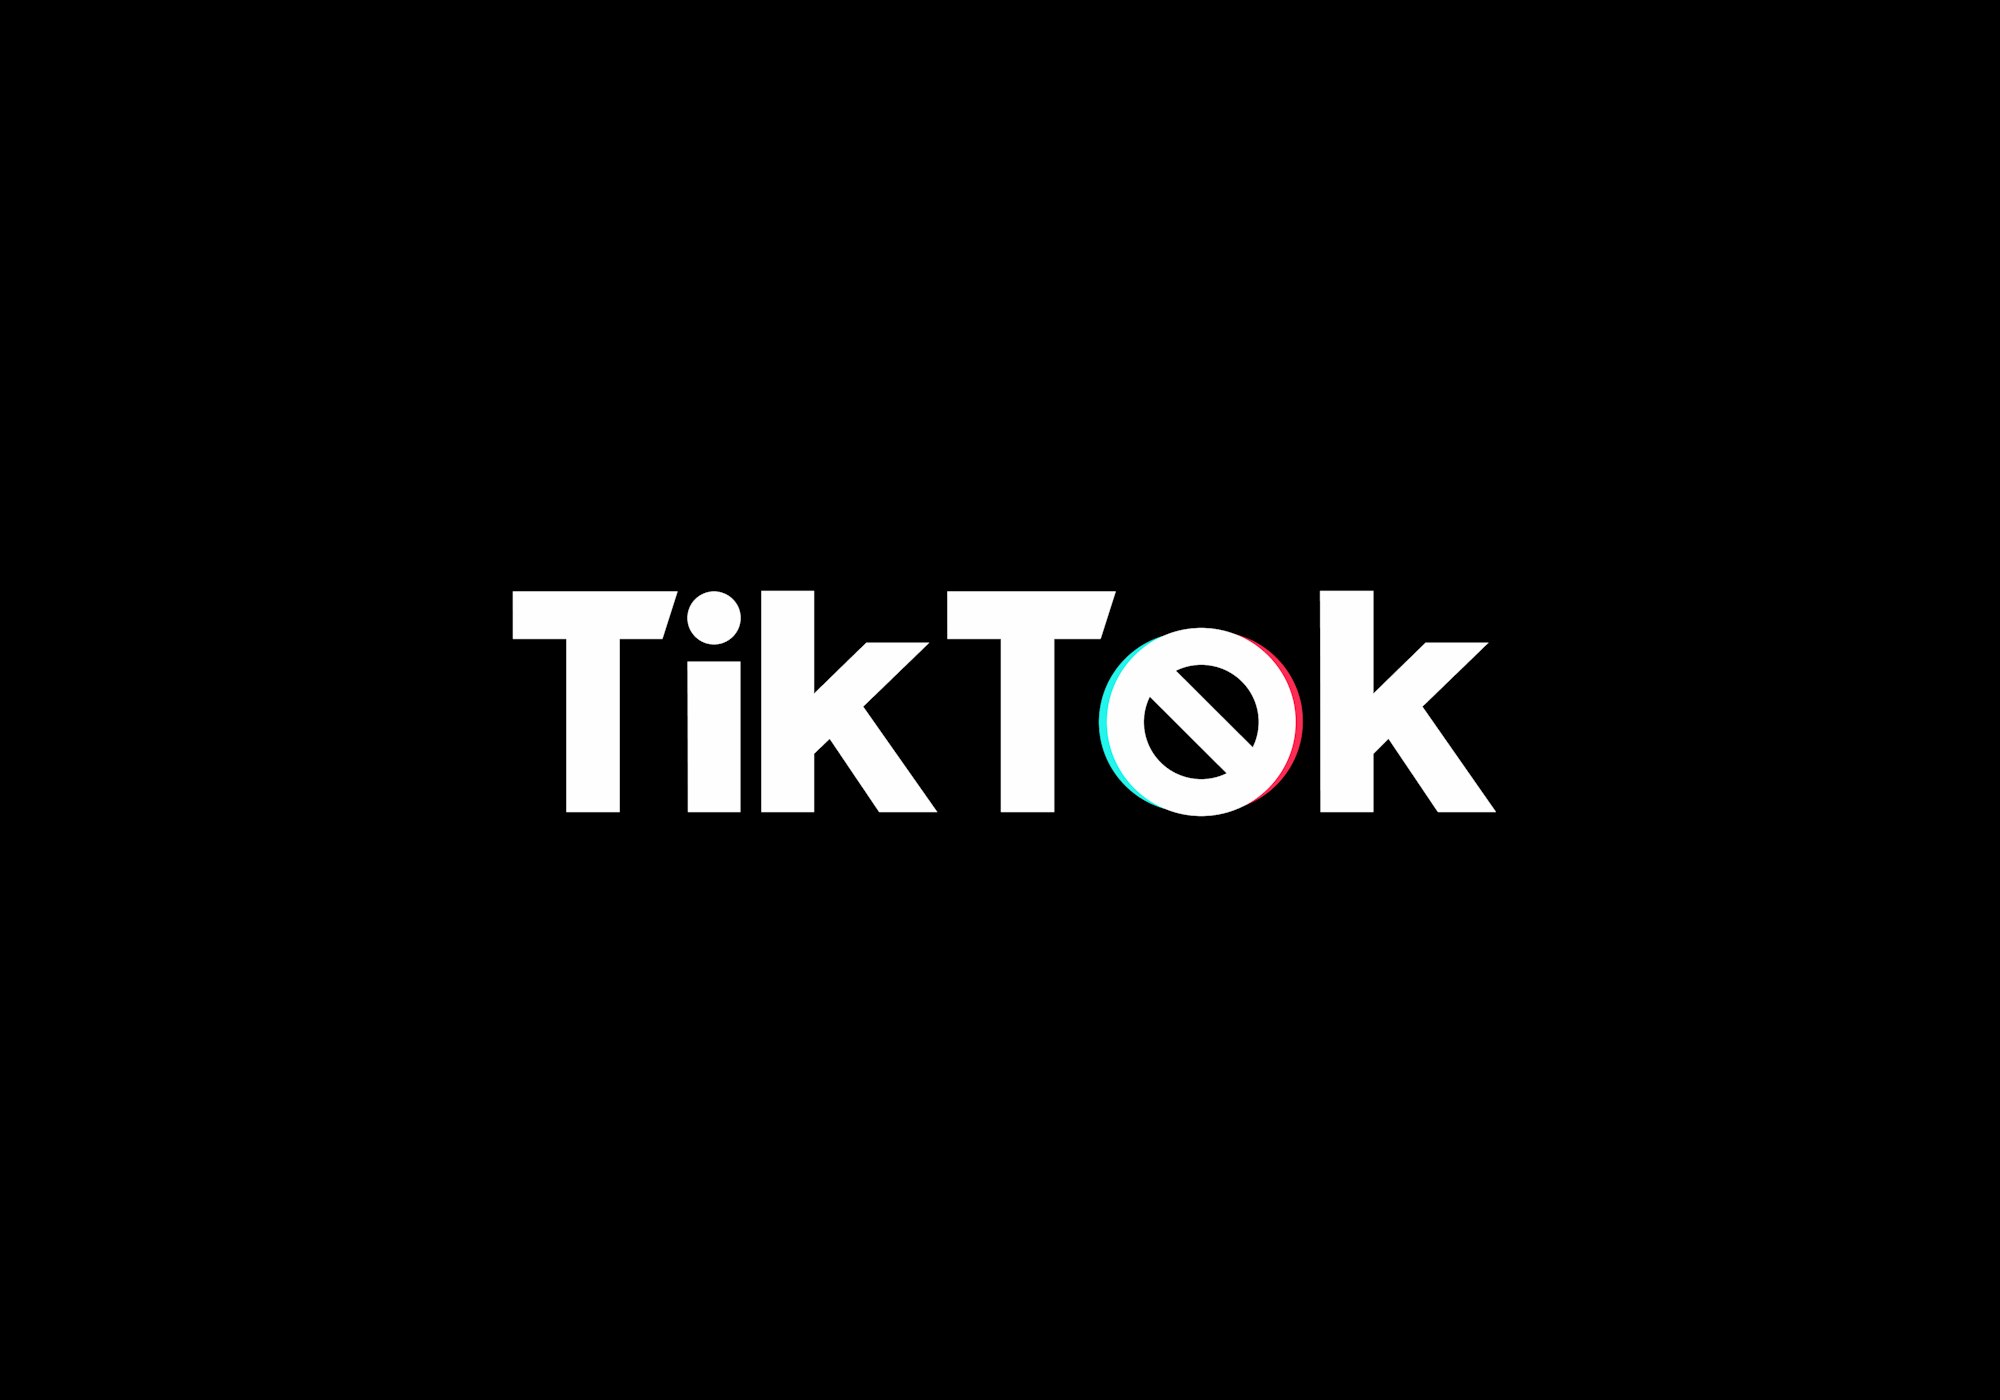 Texas bans the use of TikTok on government-issued devices